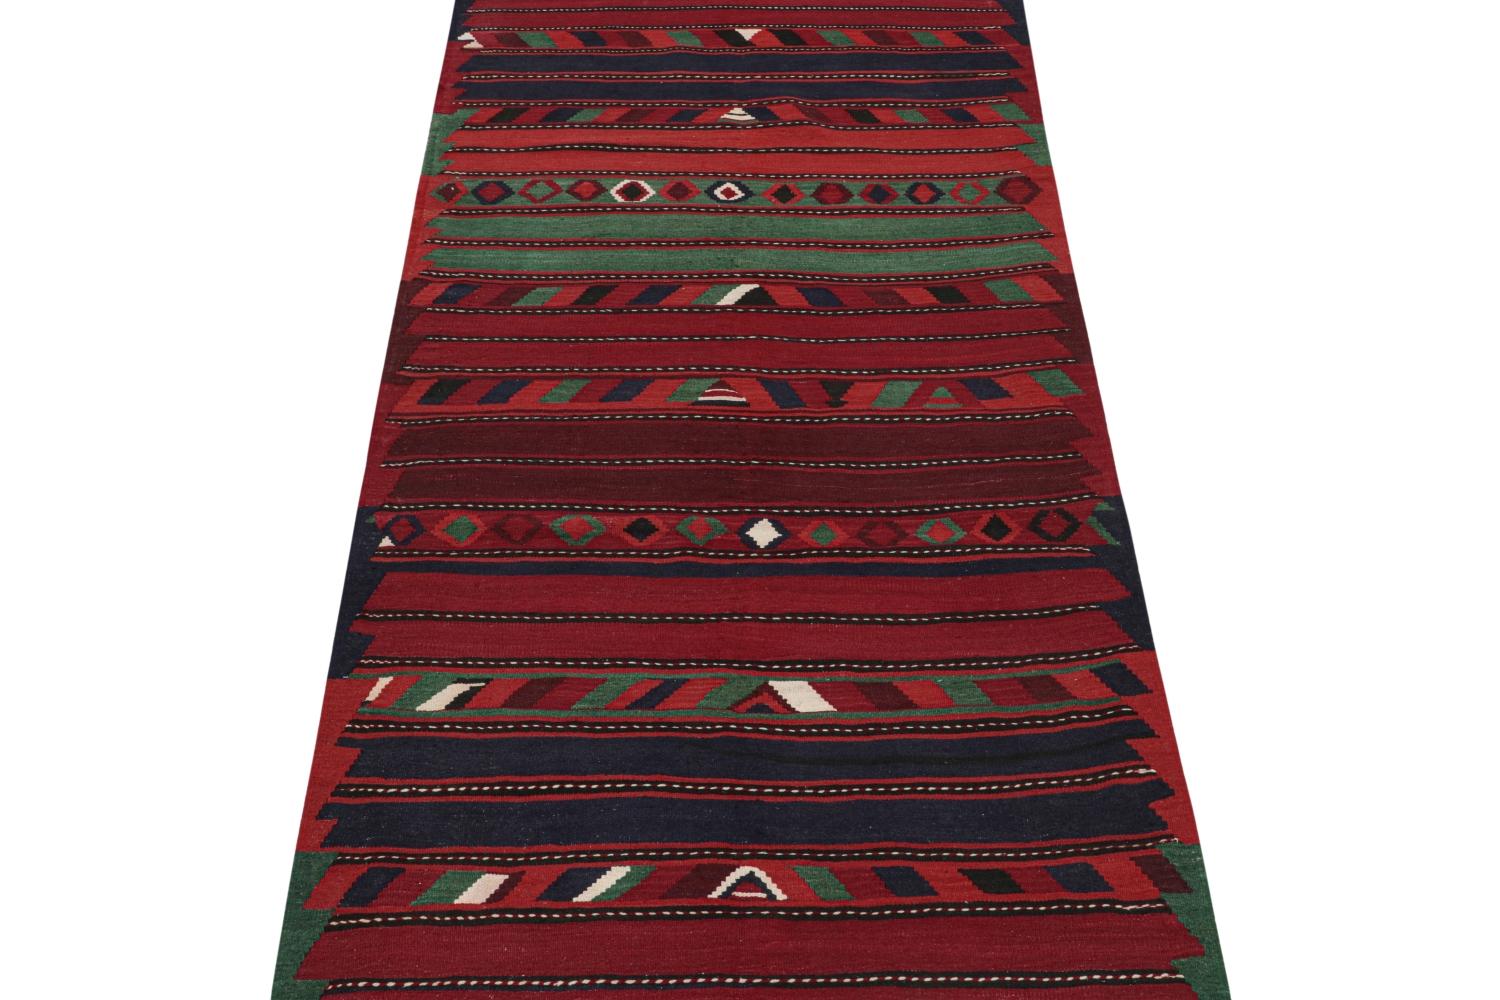 Vintage Persian Bidjar Kilim in Red, Blue and Green Geometric Patterns In Good Condition For Sale In Long Island City, NY